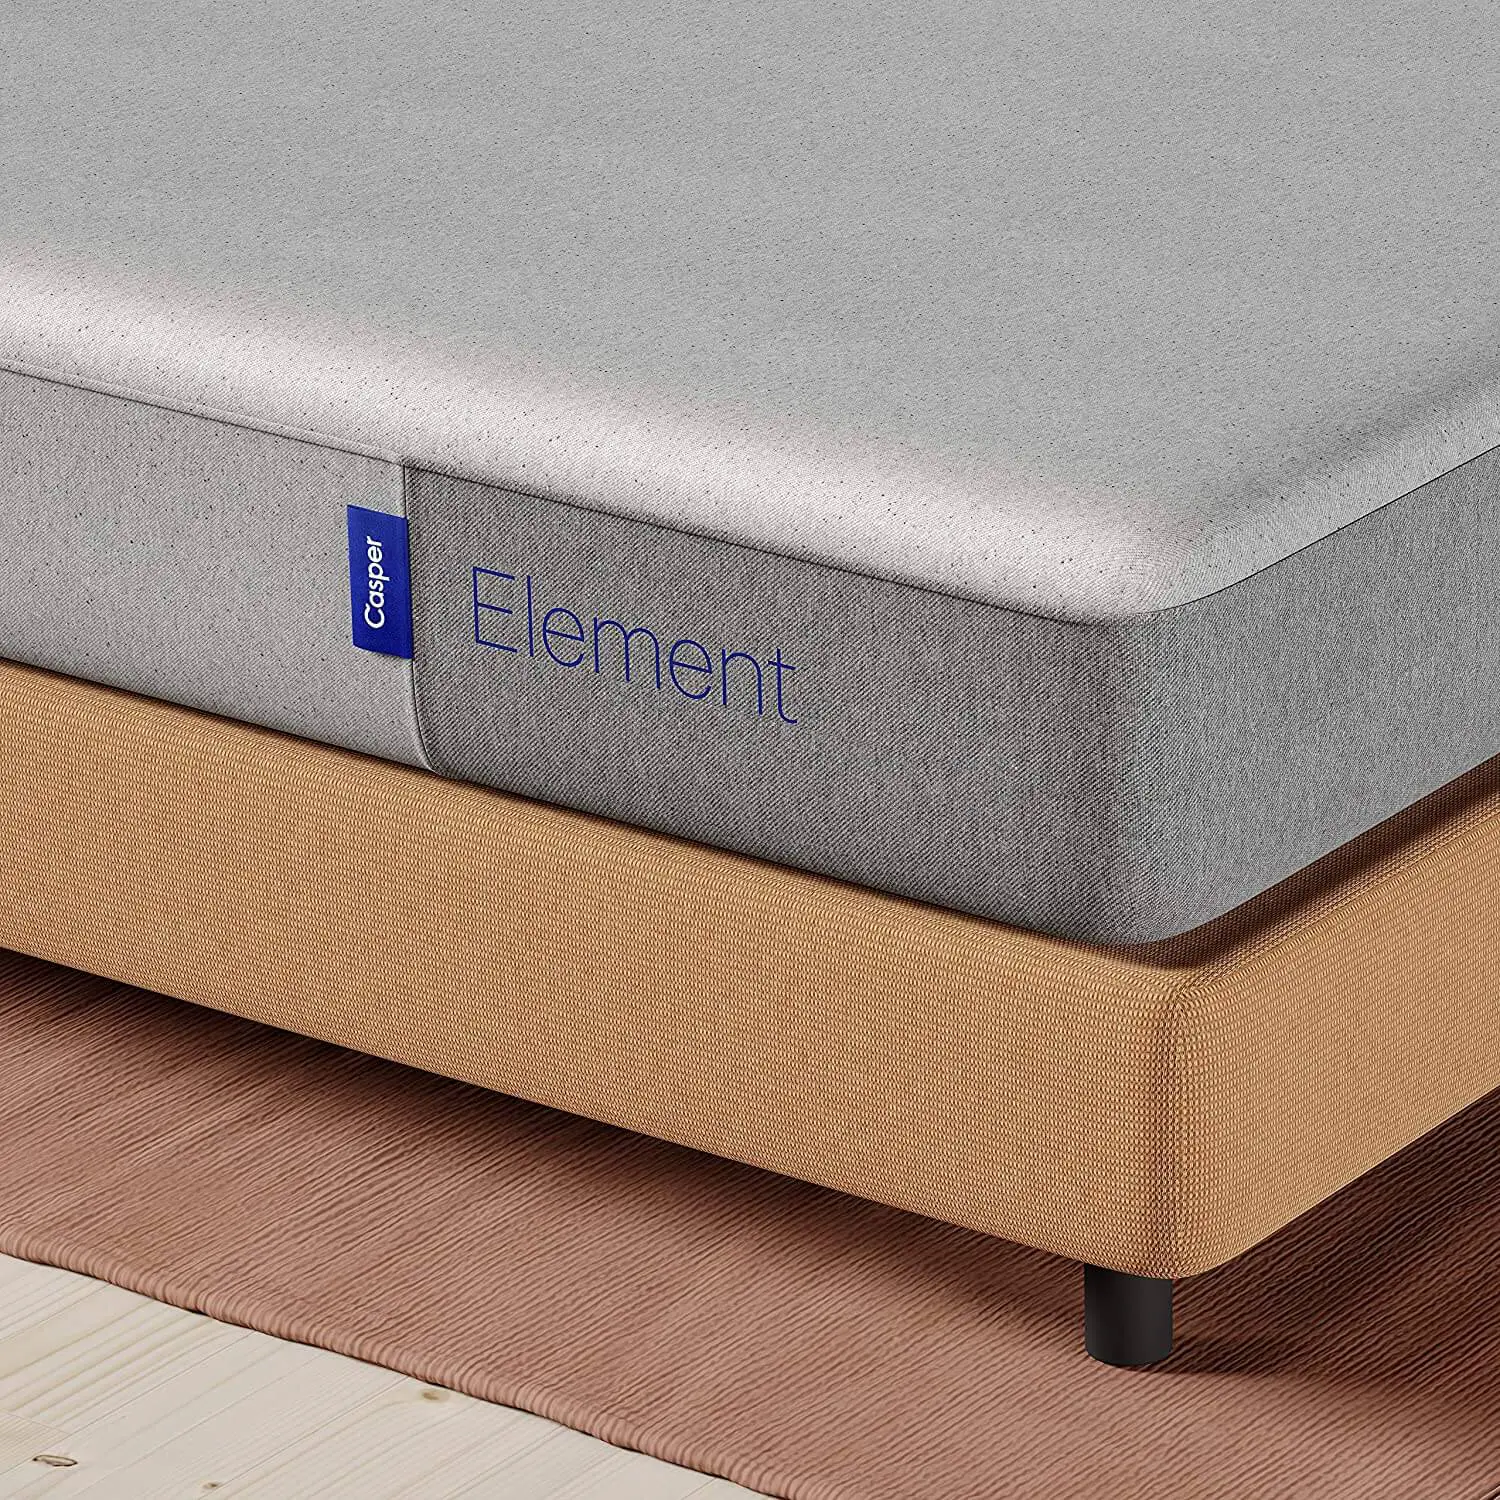 The Latest Casper Mattress Prices For 2020 (With Our Top Pick ...